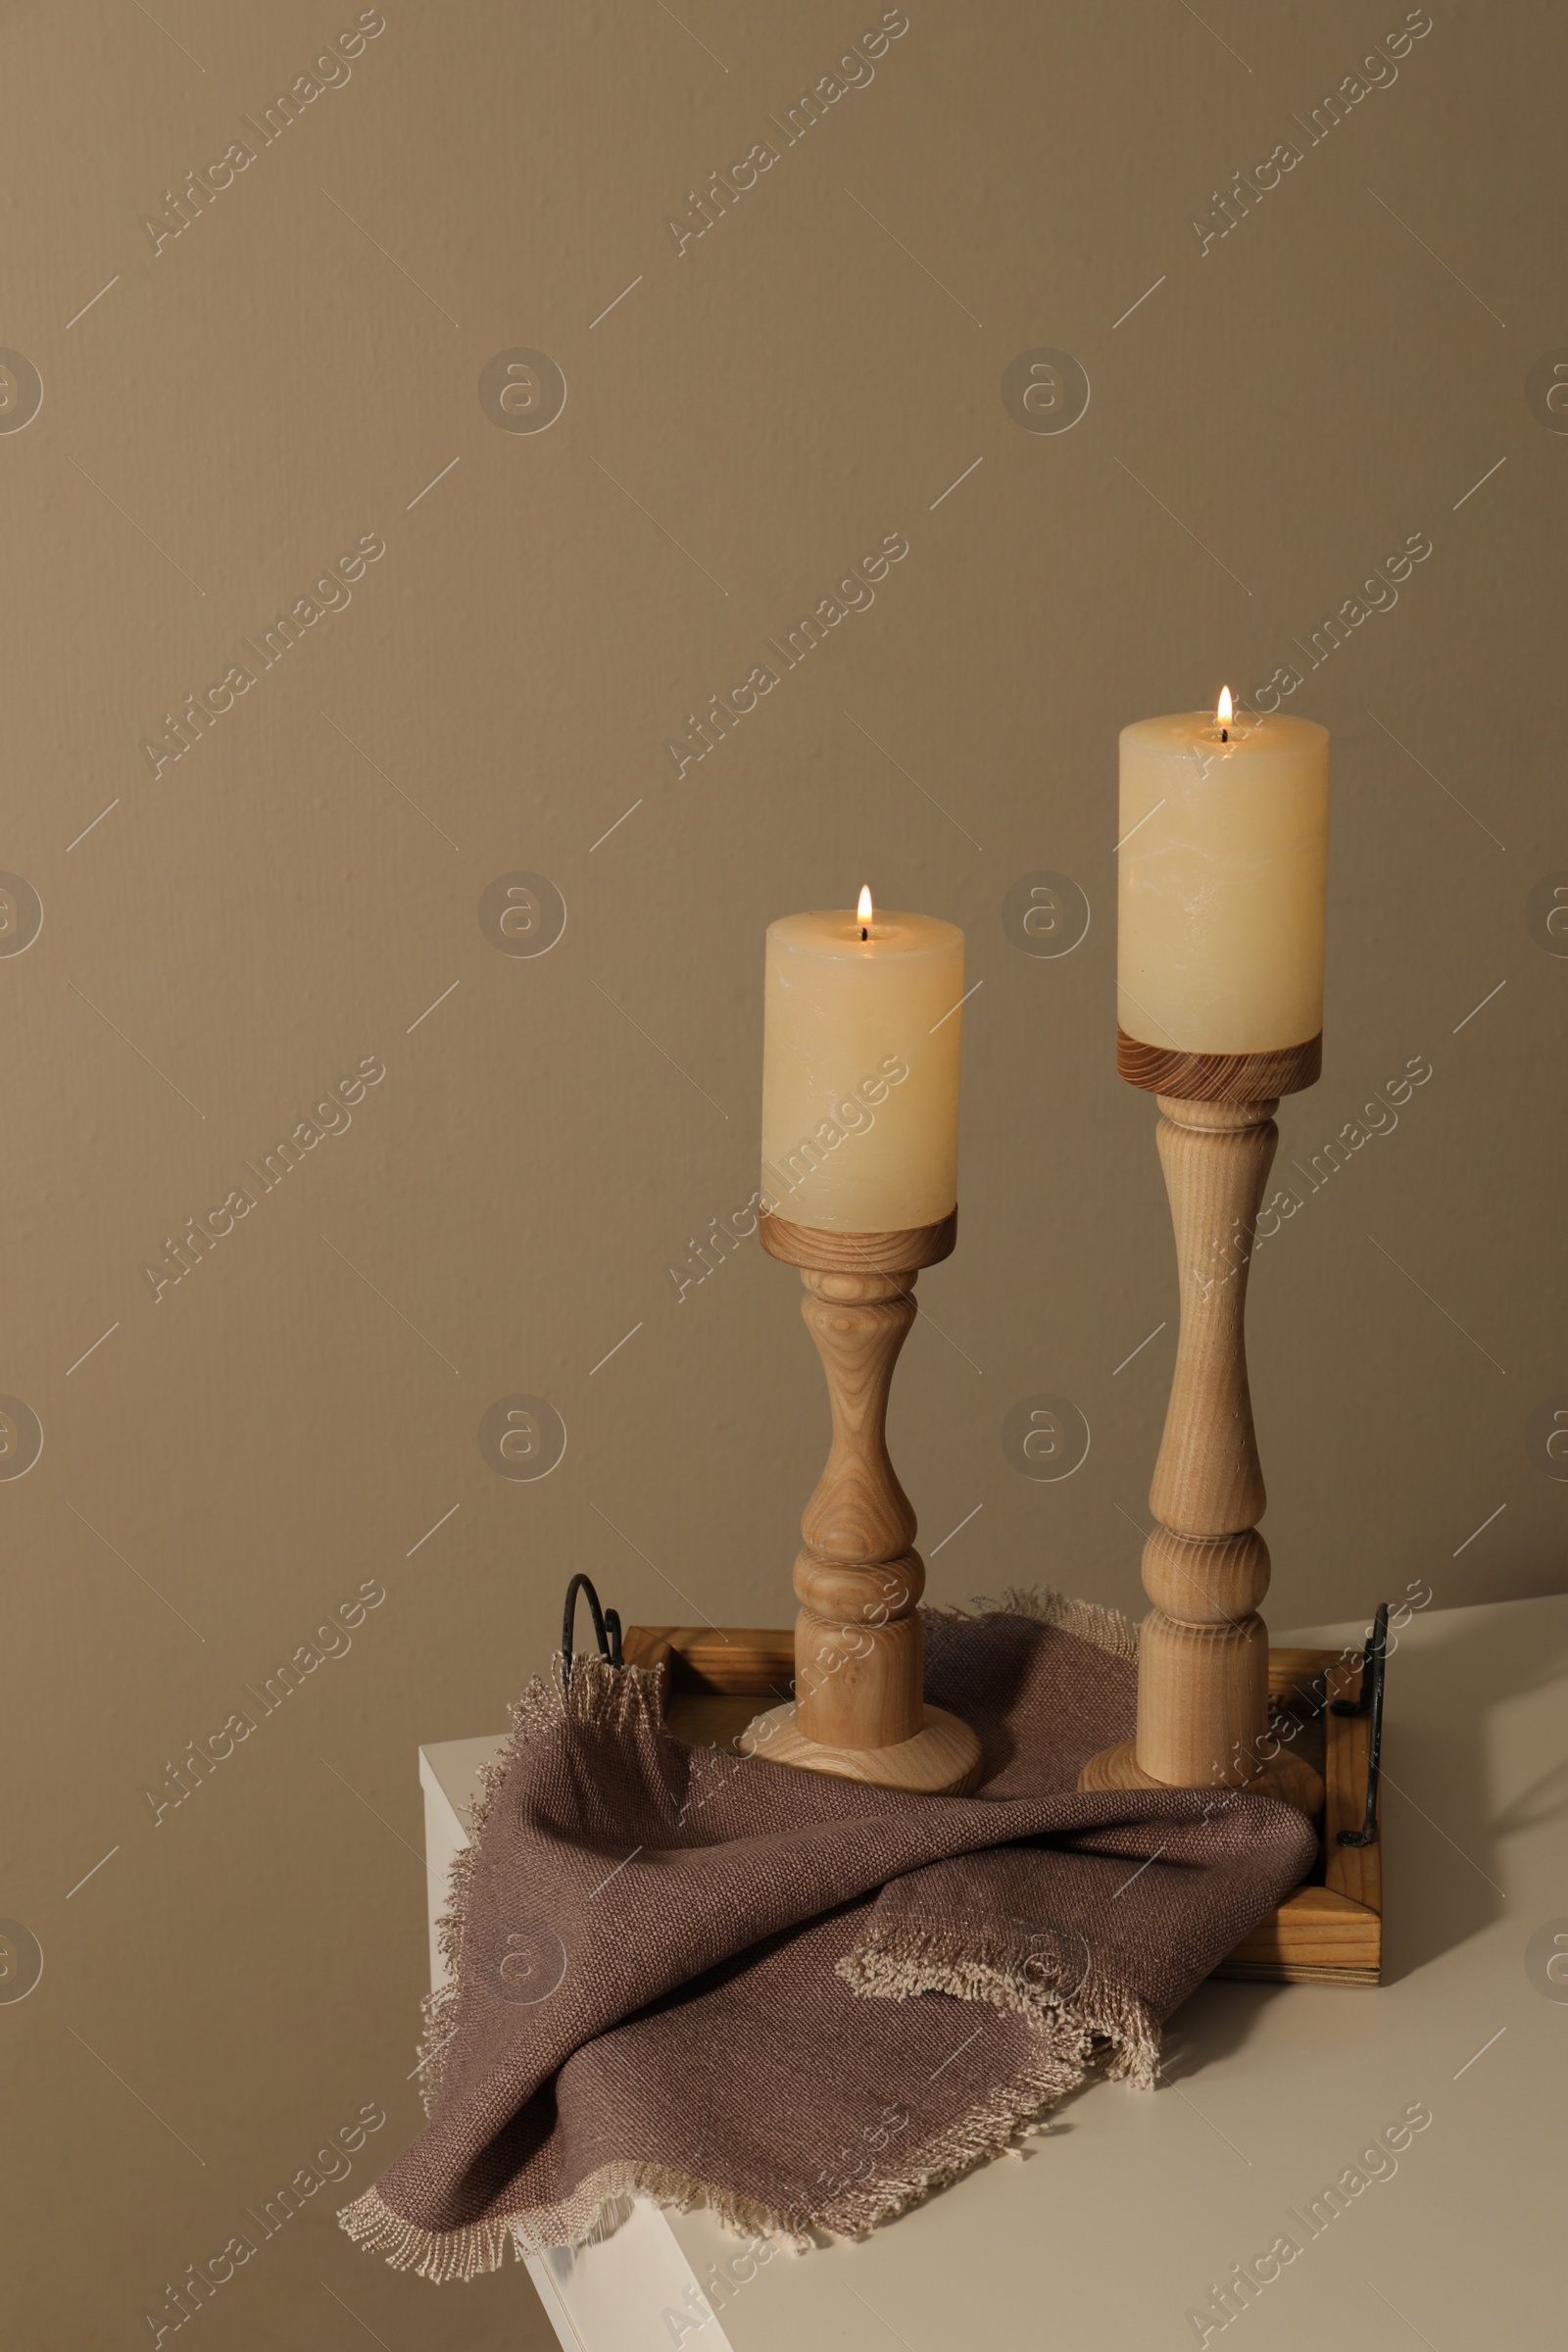 Photo of Holders with burning candles on white table near brown wall